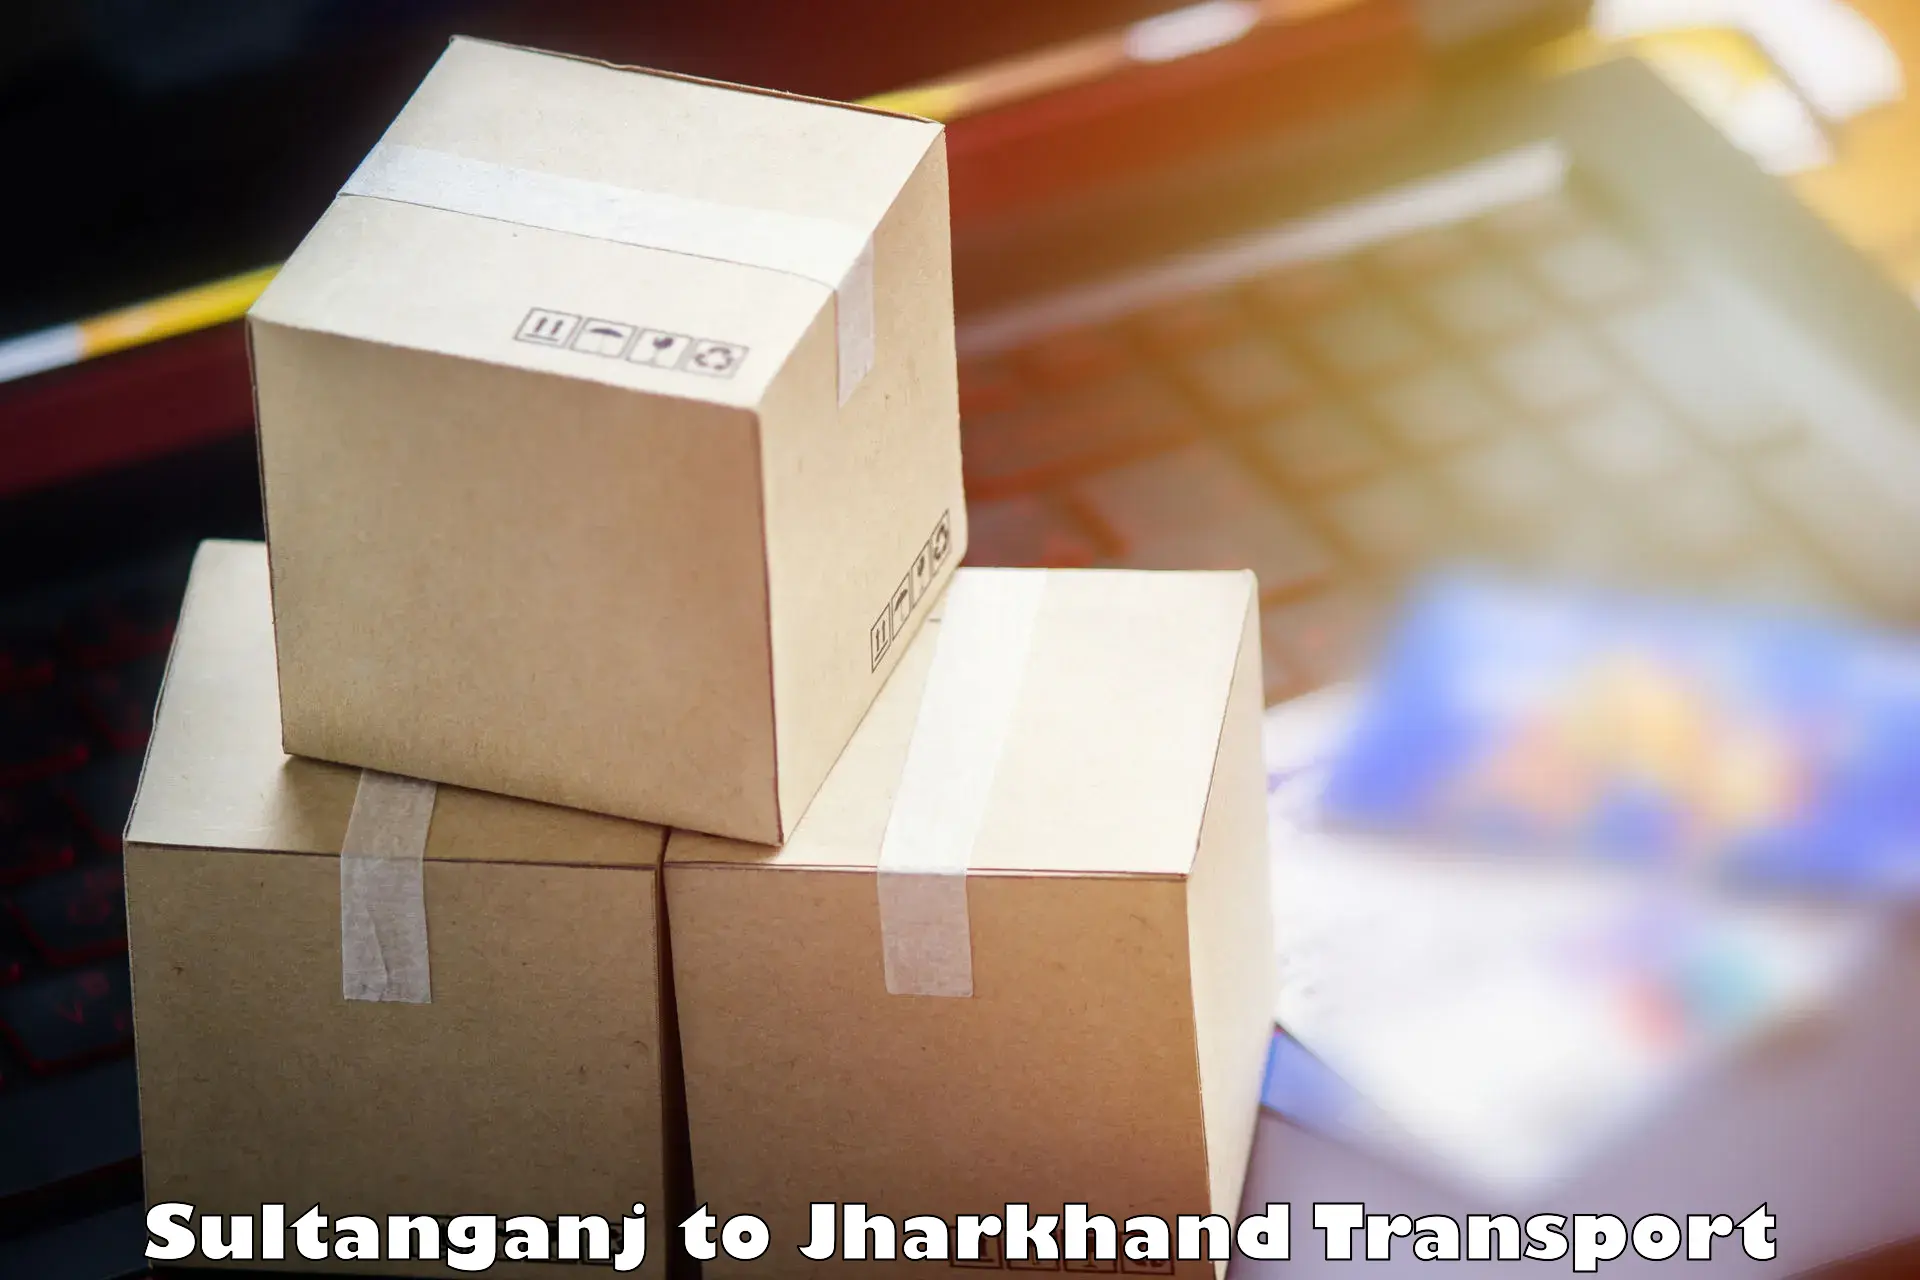 Transportation services Sultanganj to Dhanbad